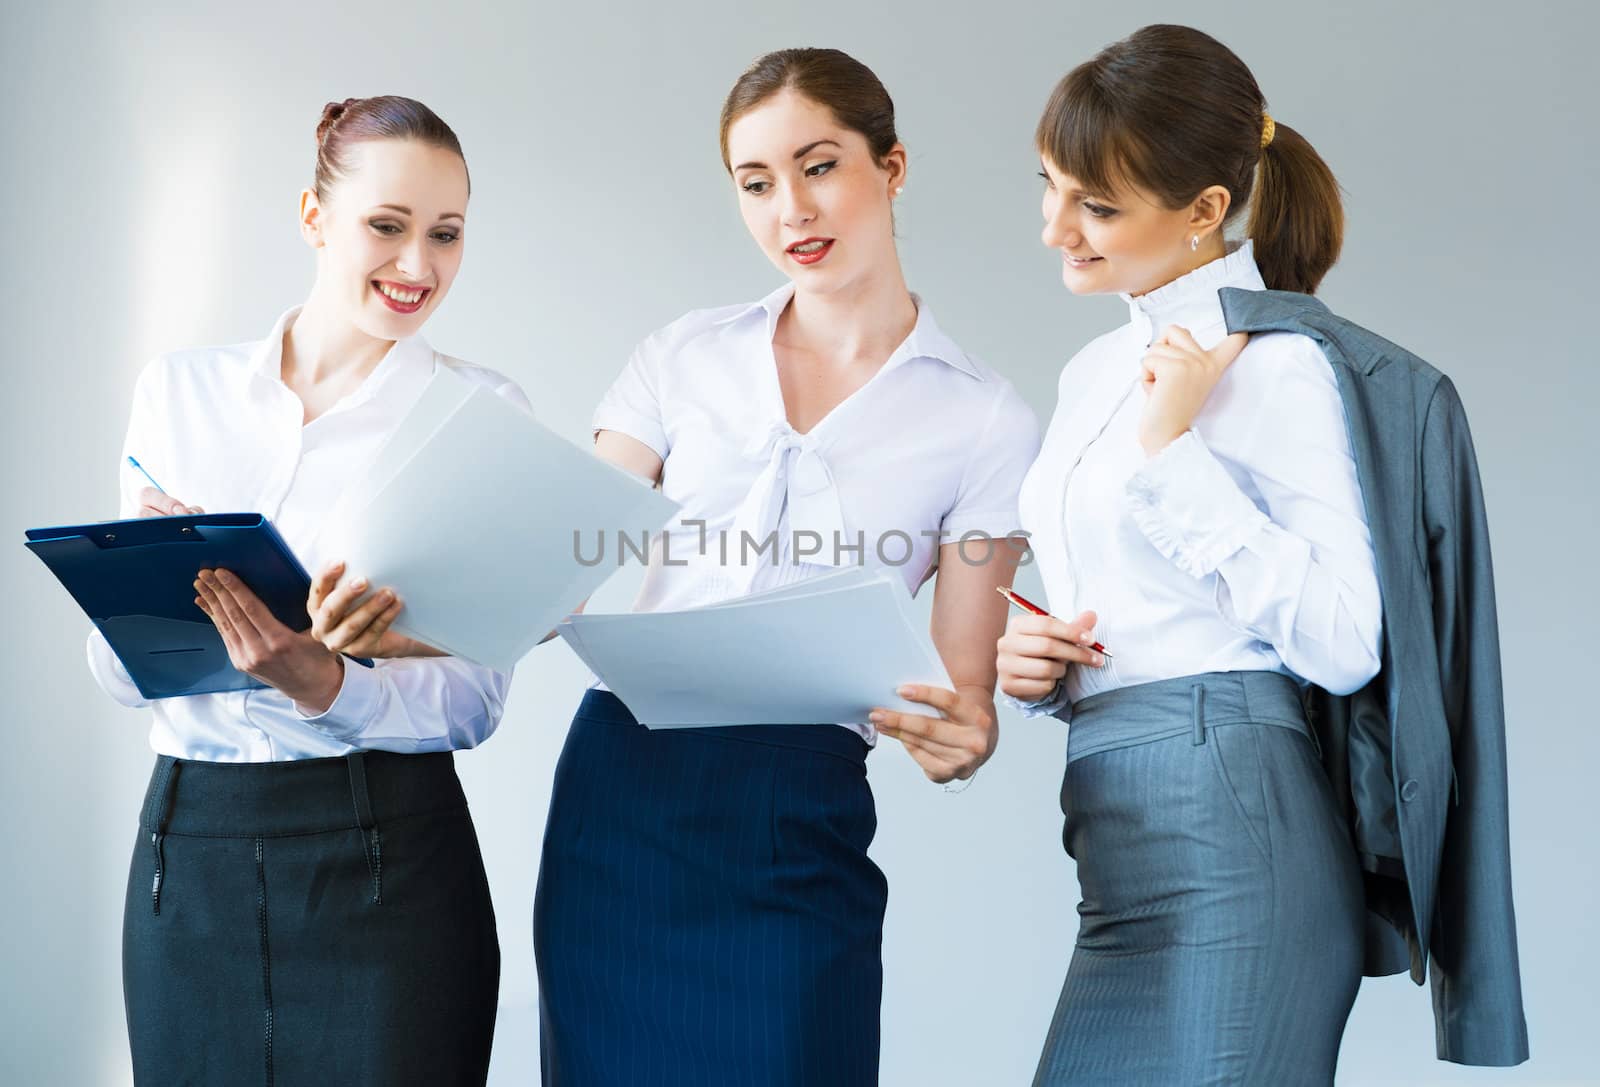 group of business women discussing documents together, teamwork in business